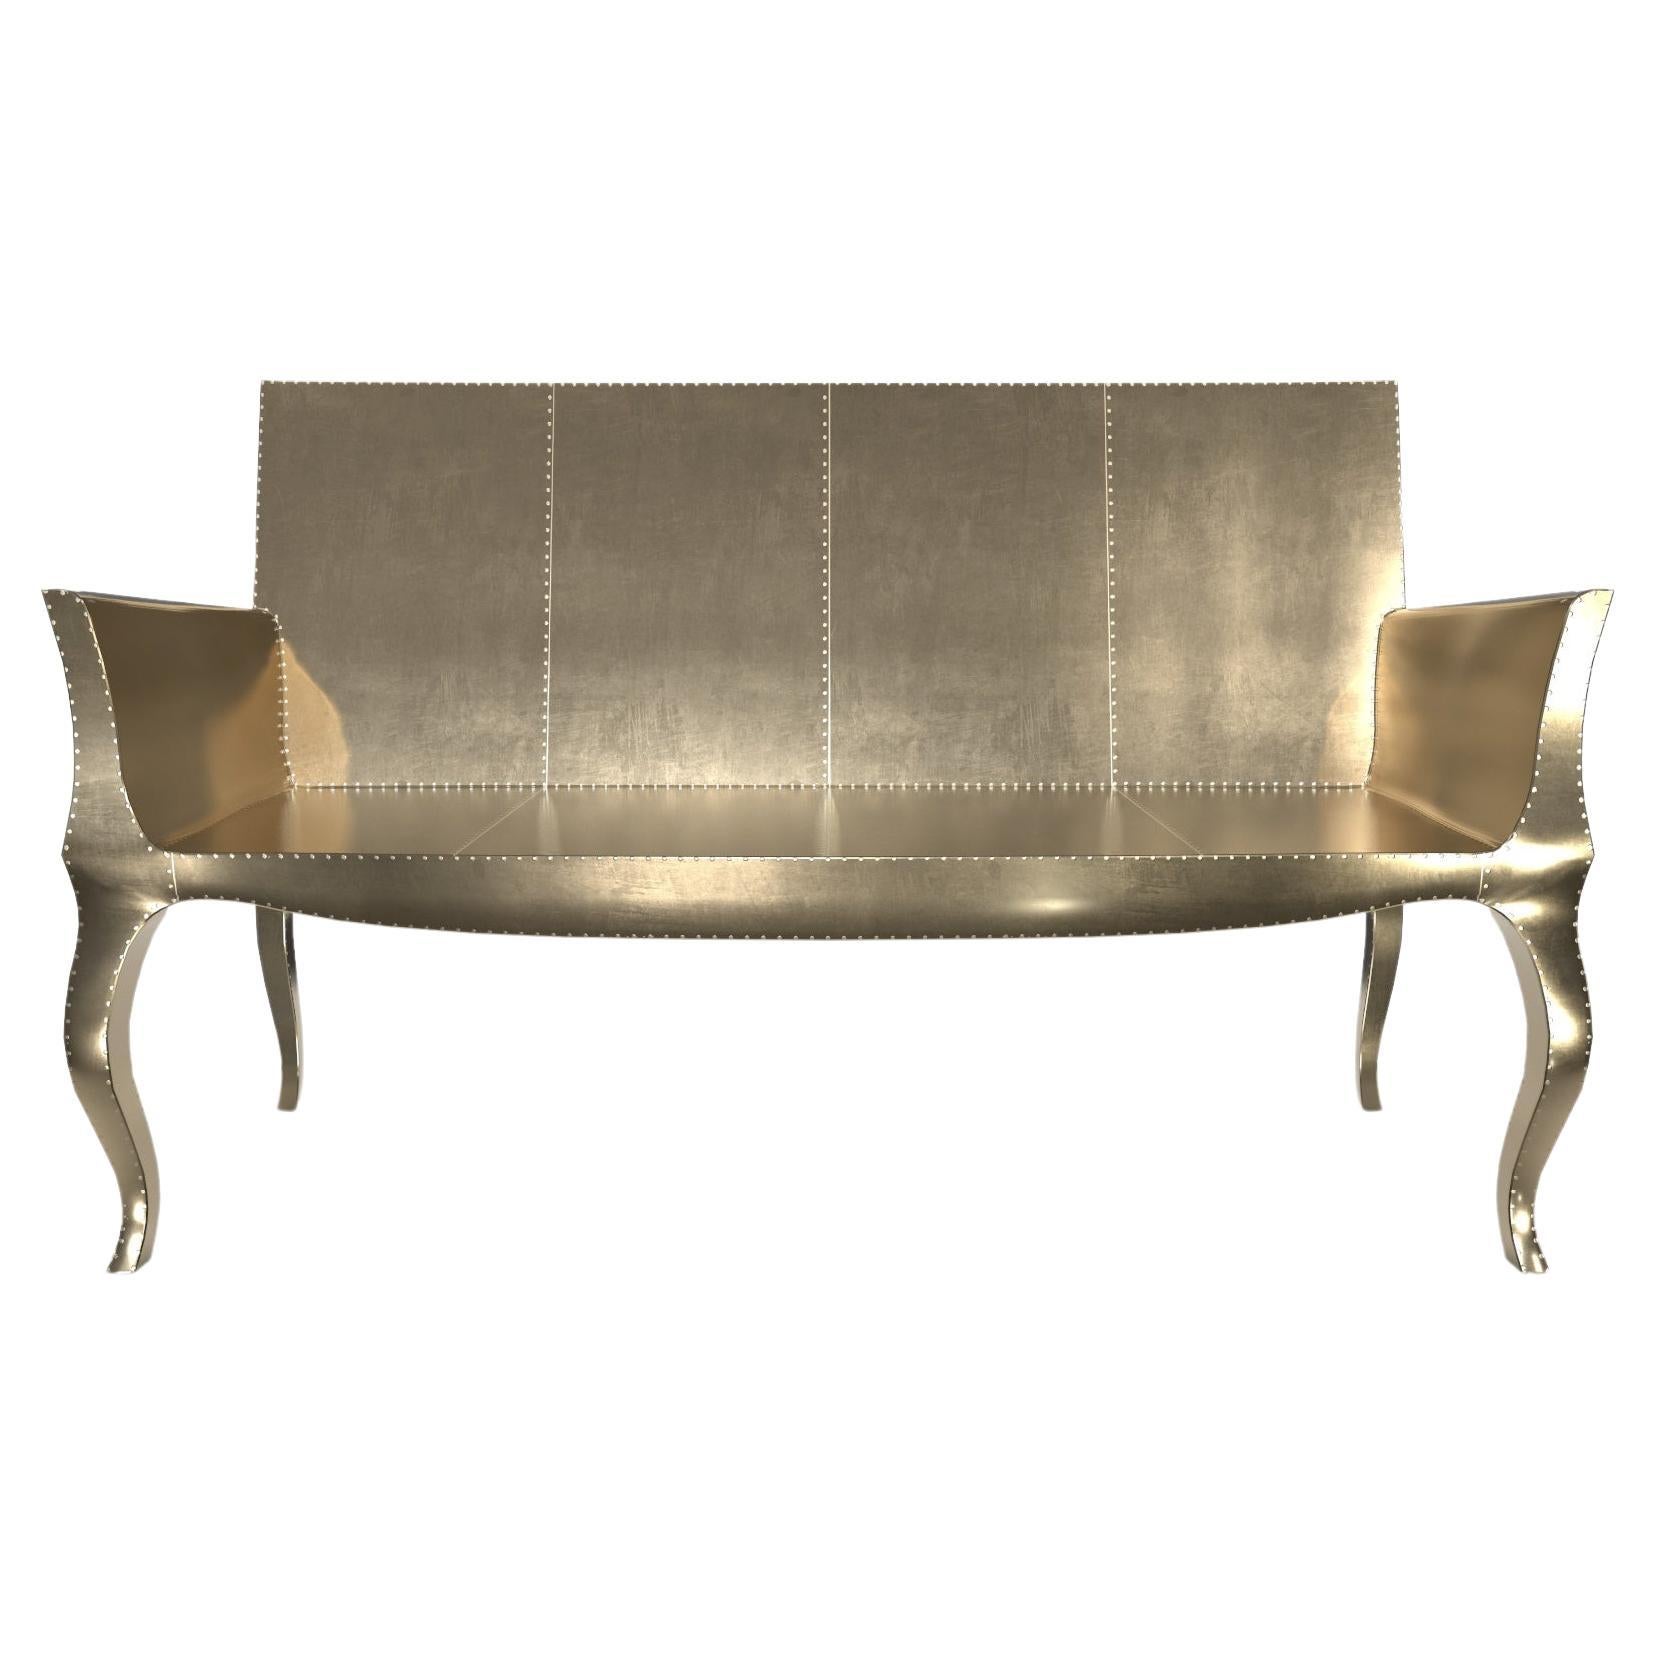 Louise Settee Art Deco Loveseats in Smooth Brass by Paul Mathieu For Sale